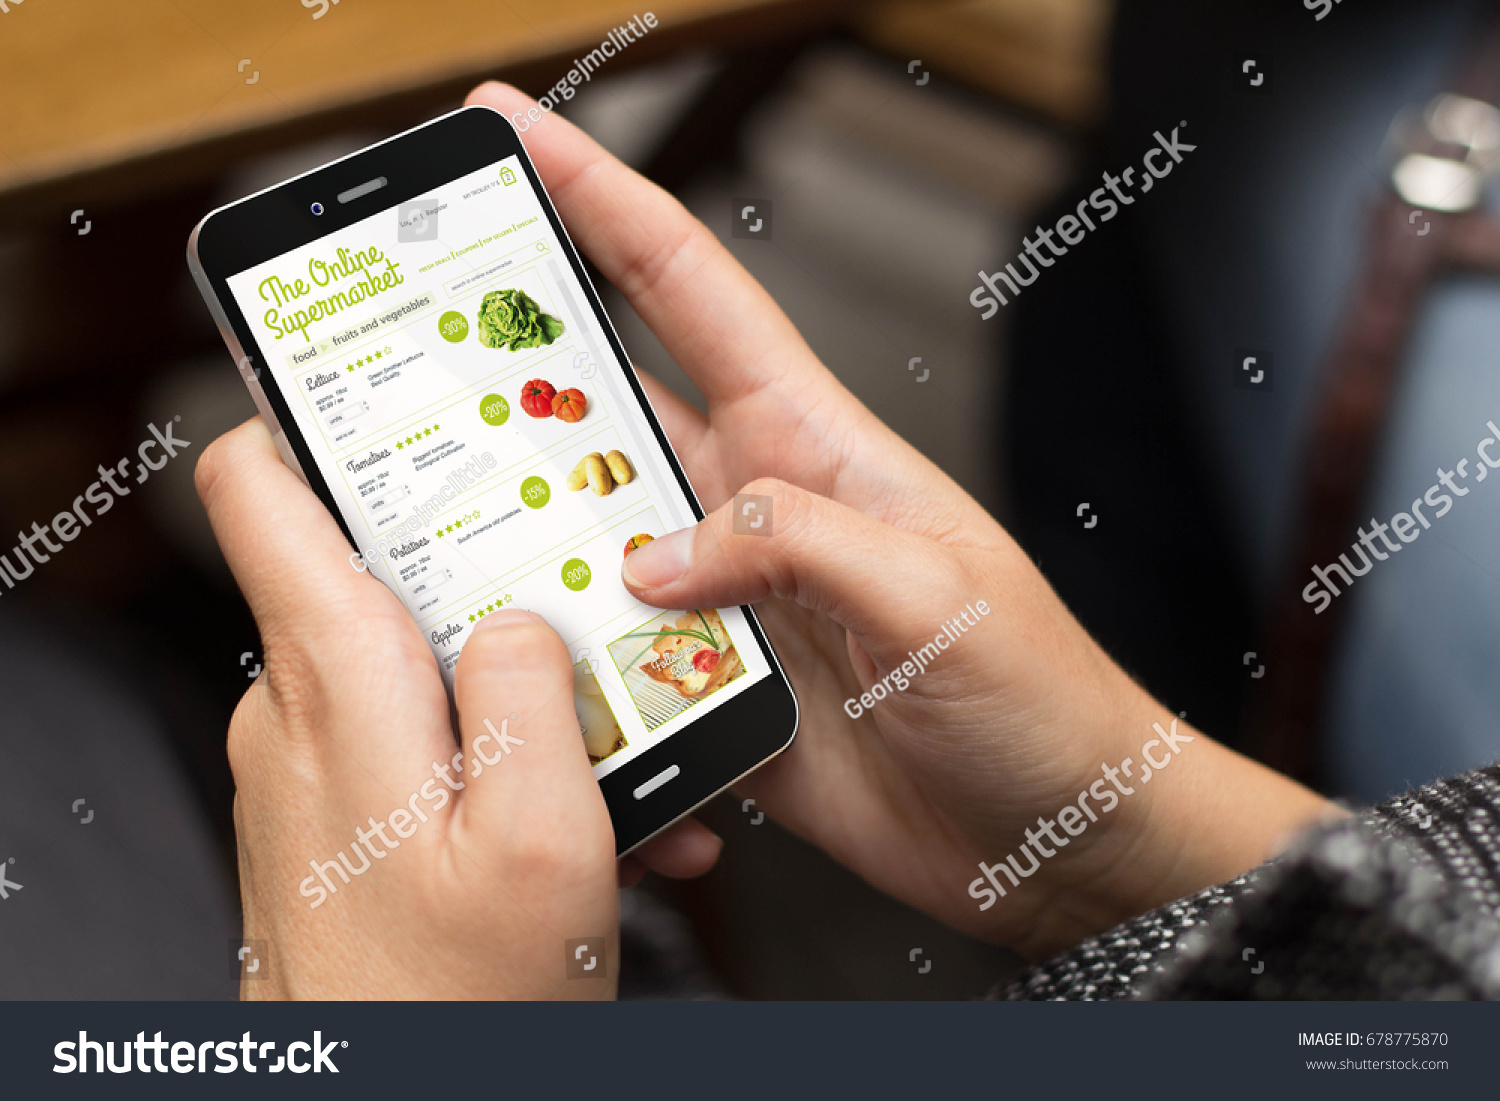 online shopping concept: girl using a digital generated phone with online supermarket on the screen. All screen graphics are made up. #678775870